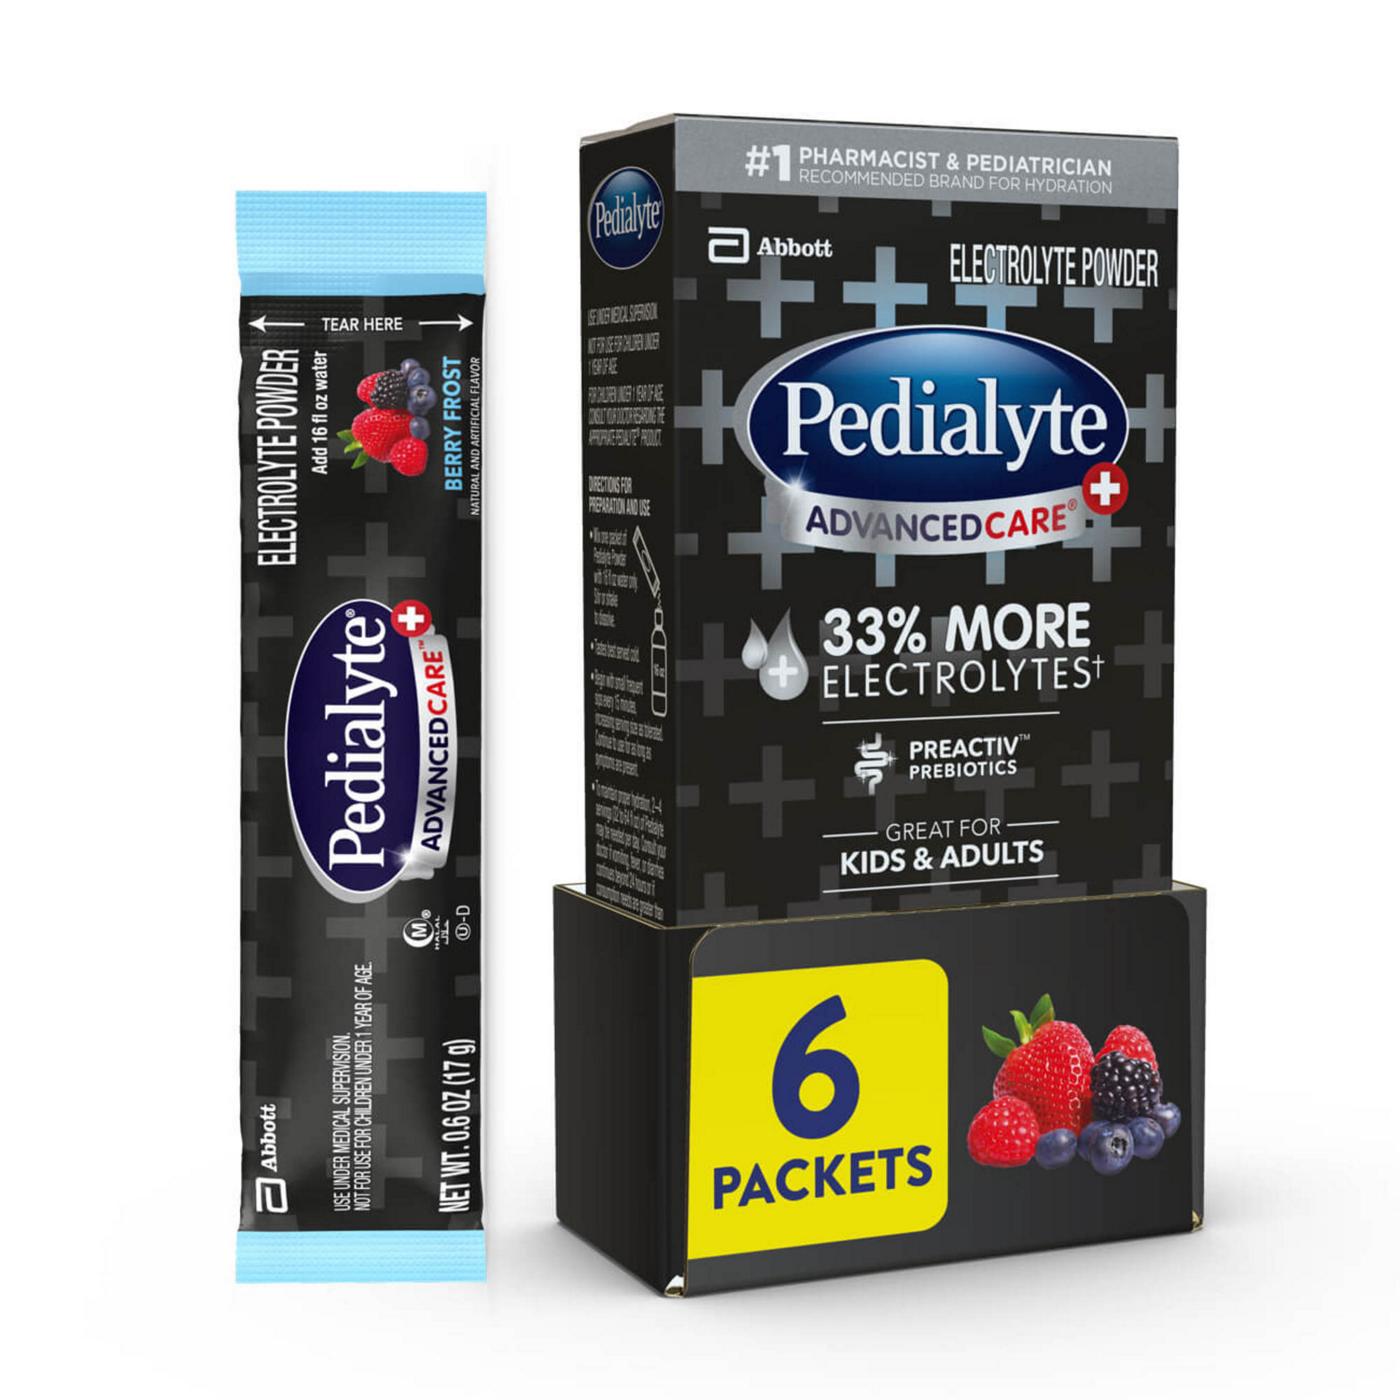 Pedialyte AdvancedCare Plus Electrolyte Powder Packs - Berry Frost; image 7 of 7